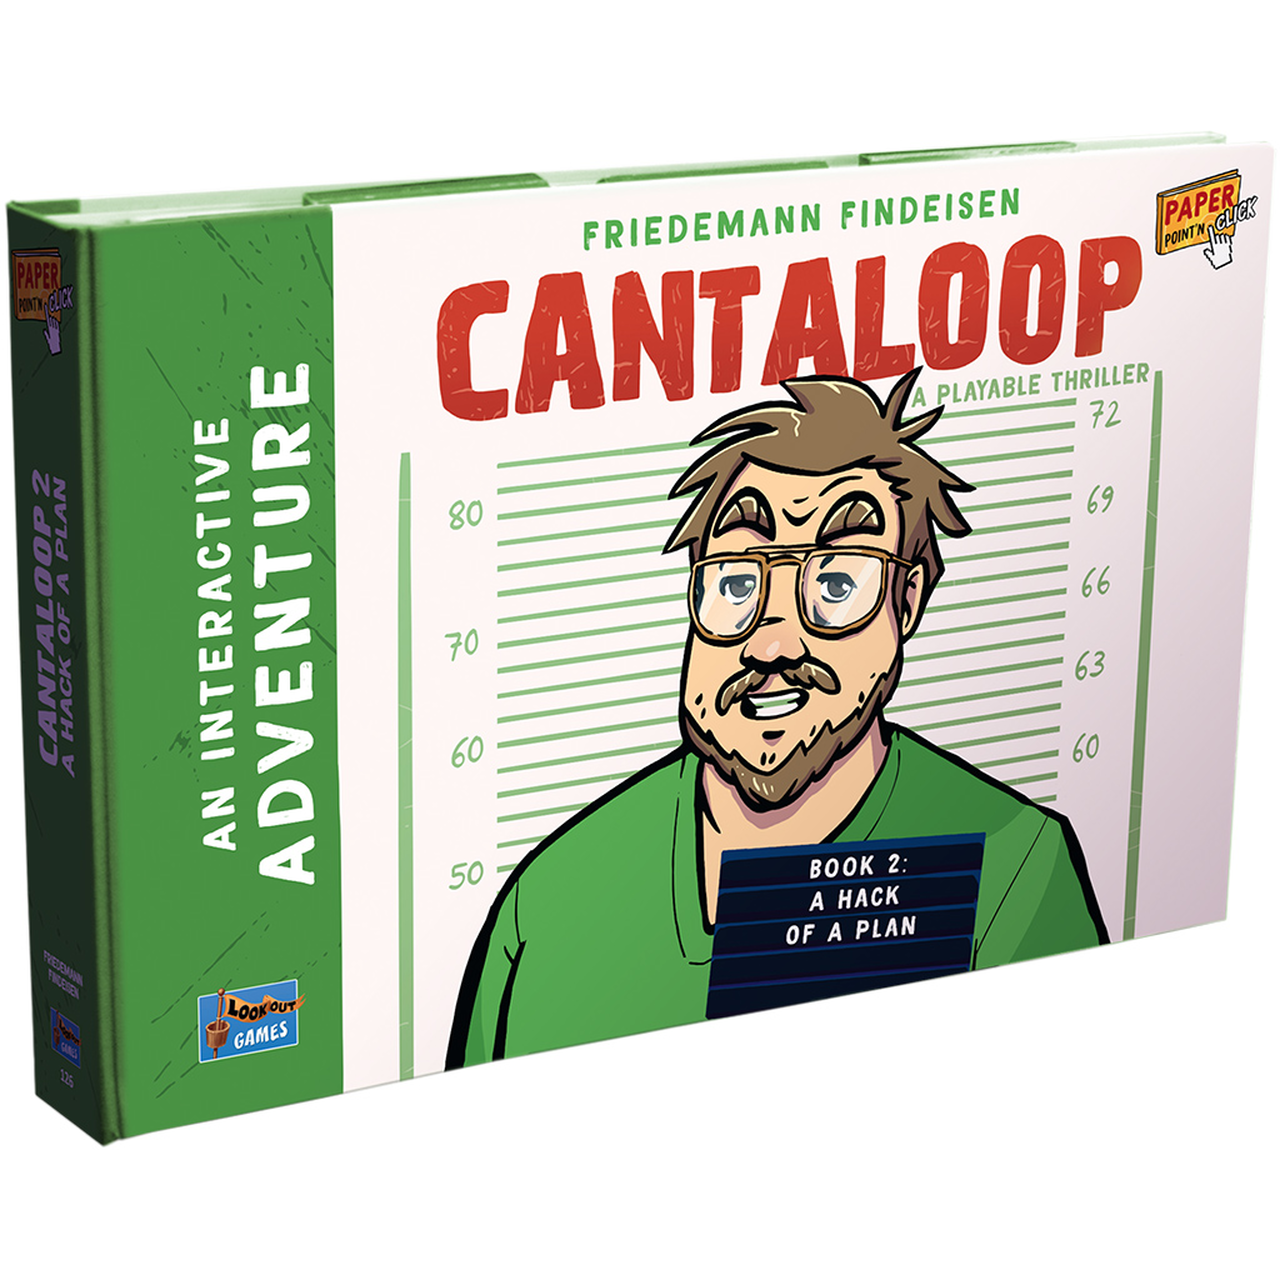 (BSG Certified USED) Cantaloop - Book 2: A Hack of a Plan